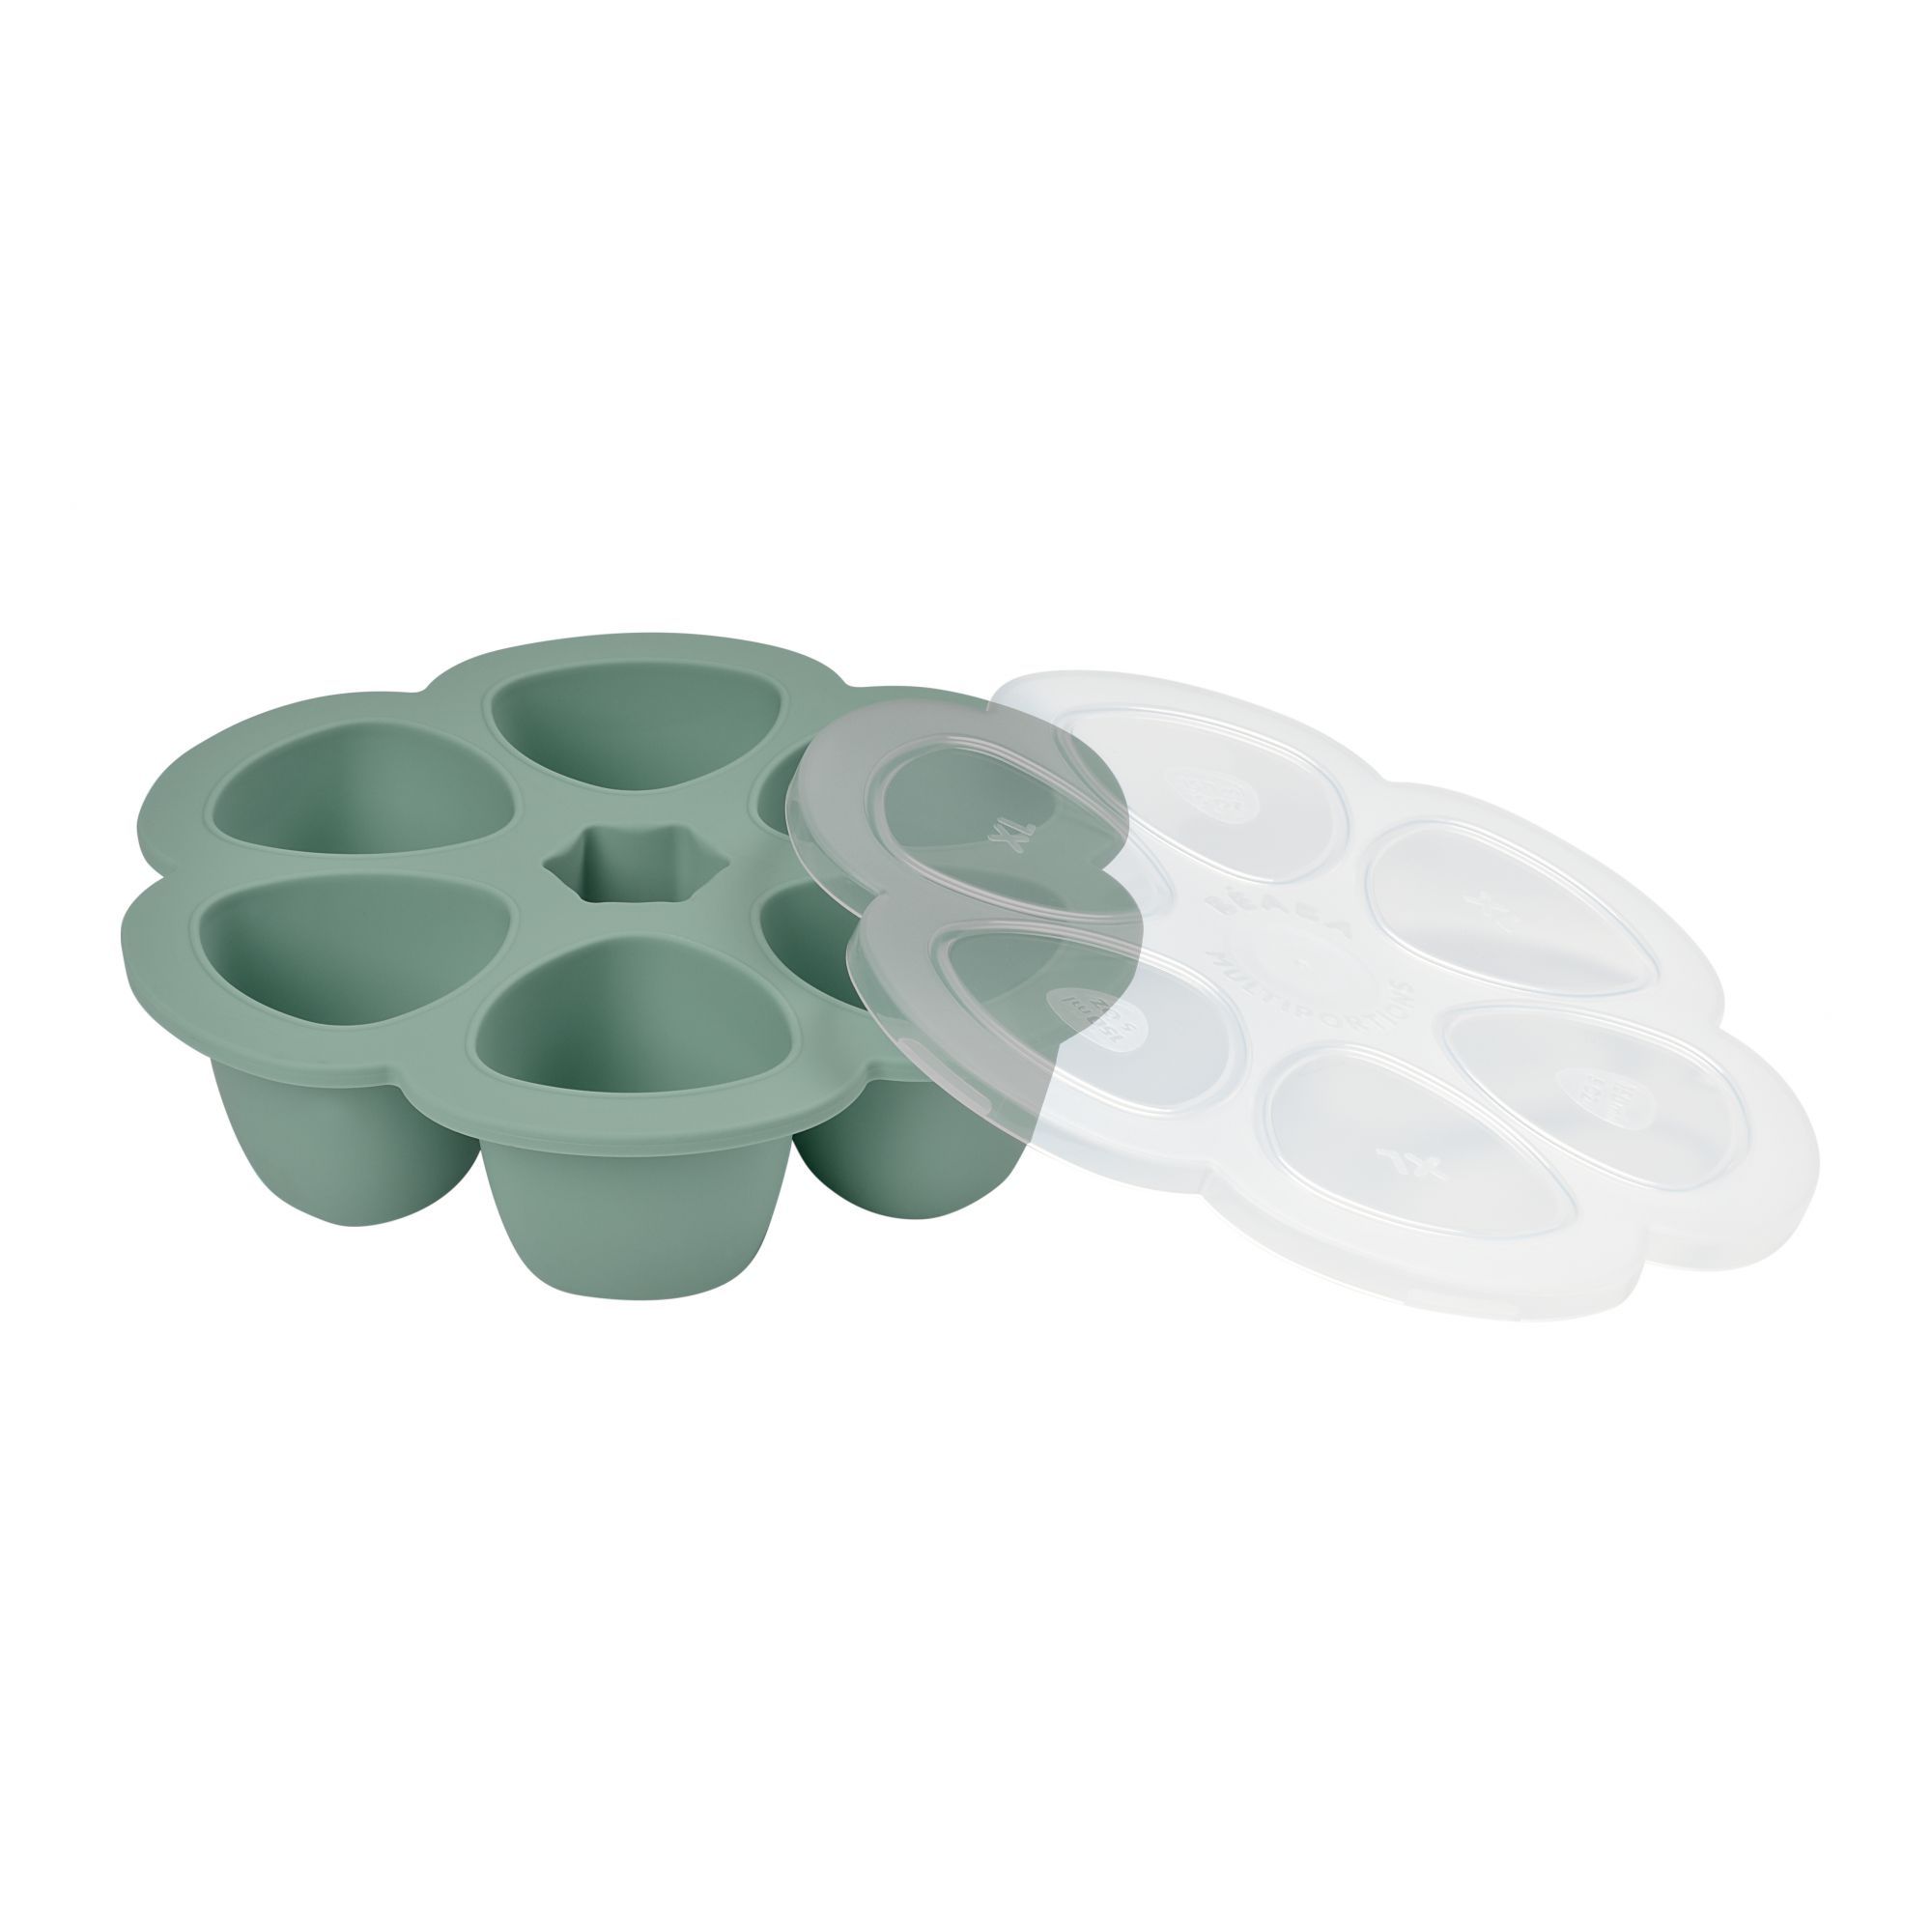 Multiportions silicone 6 x 150 ml vert sauge green - Made in Bébé